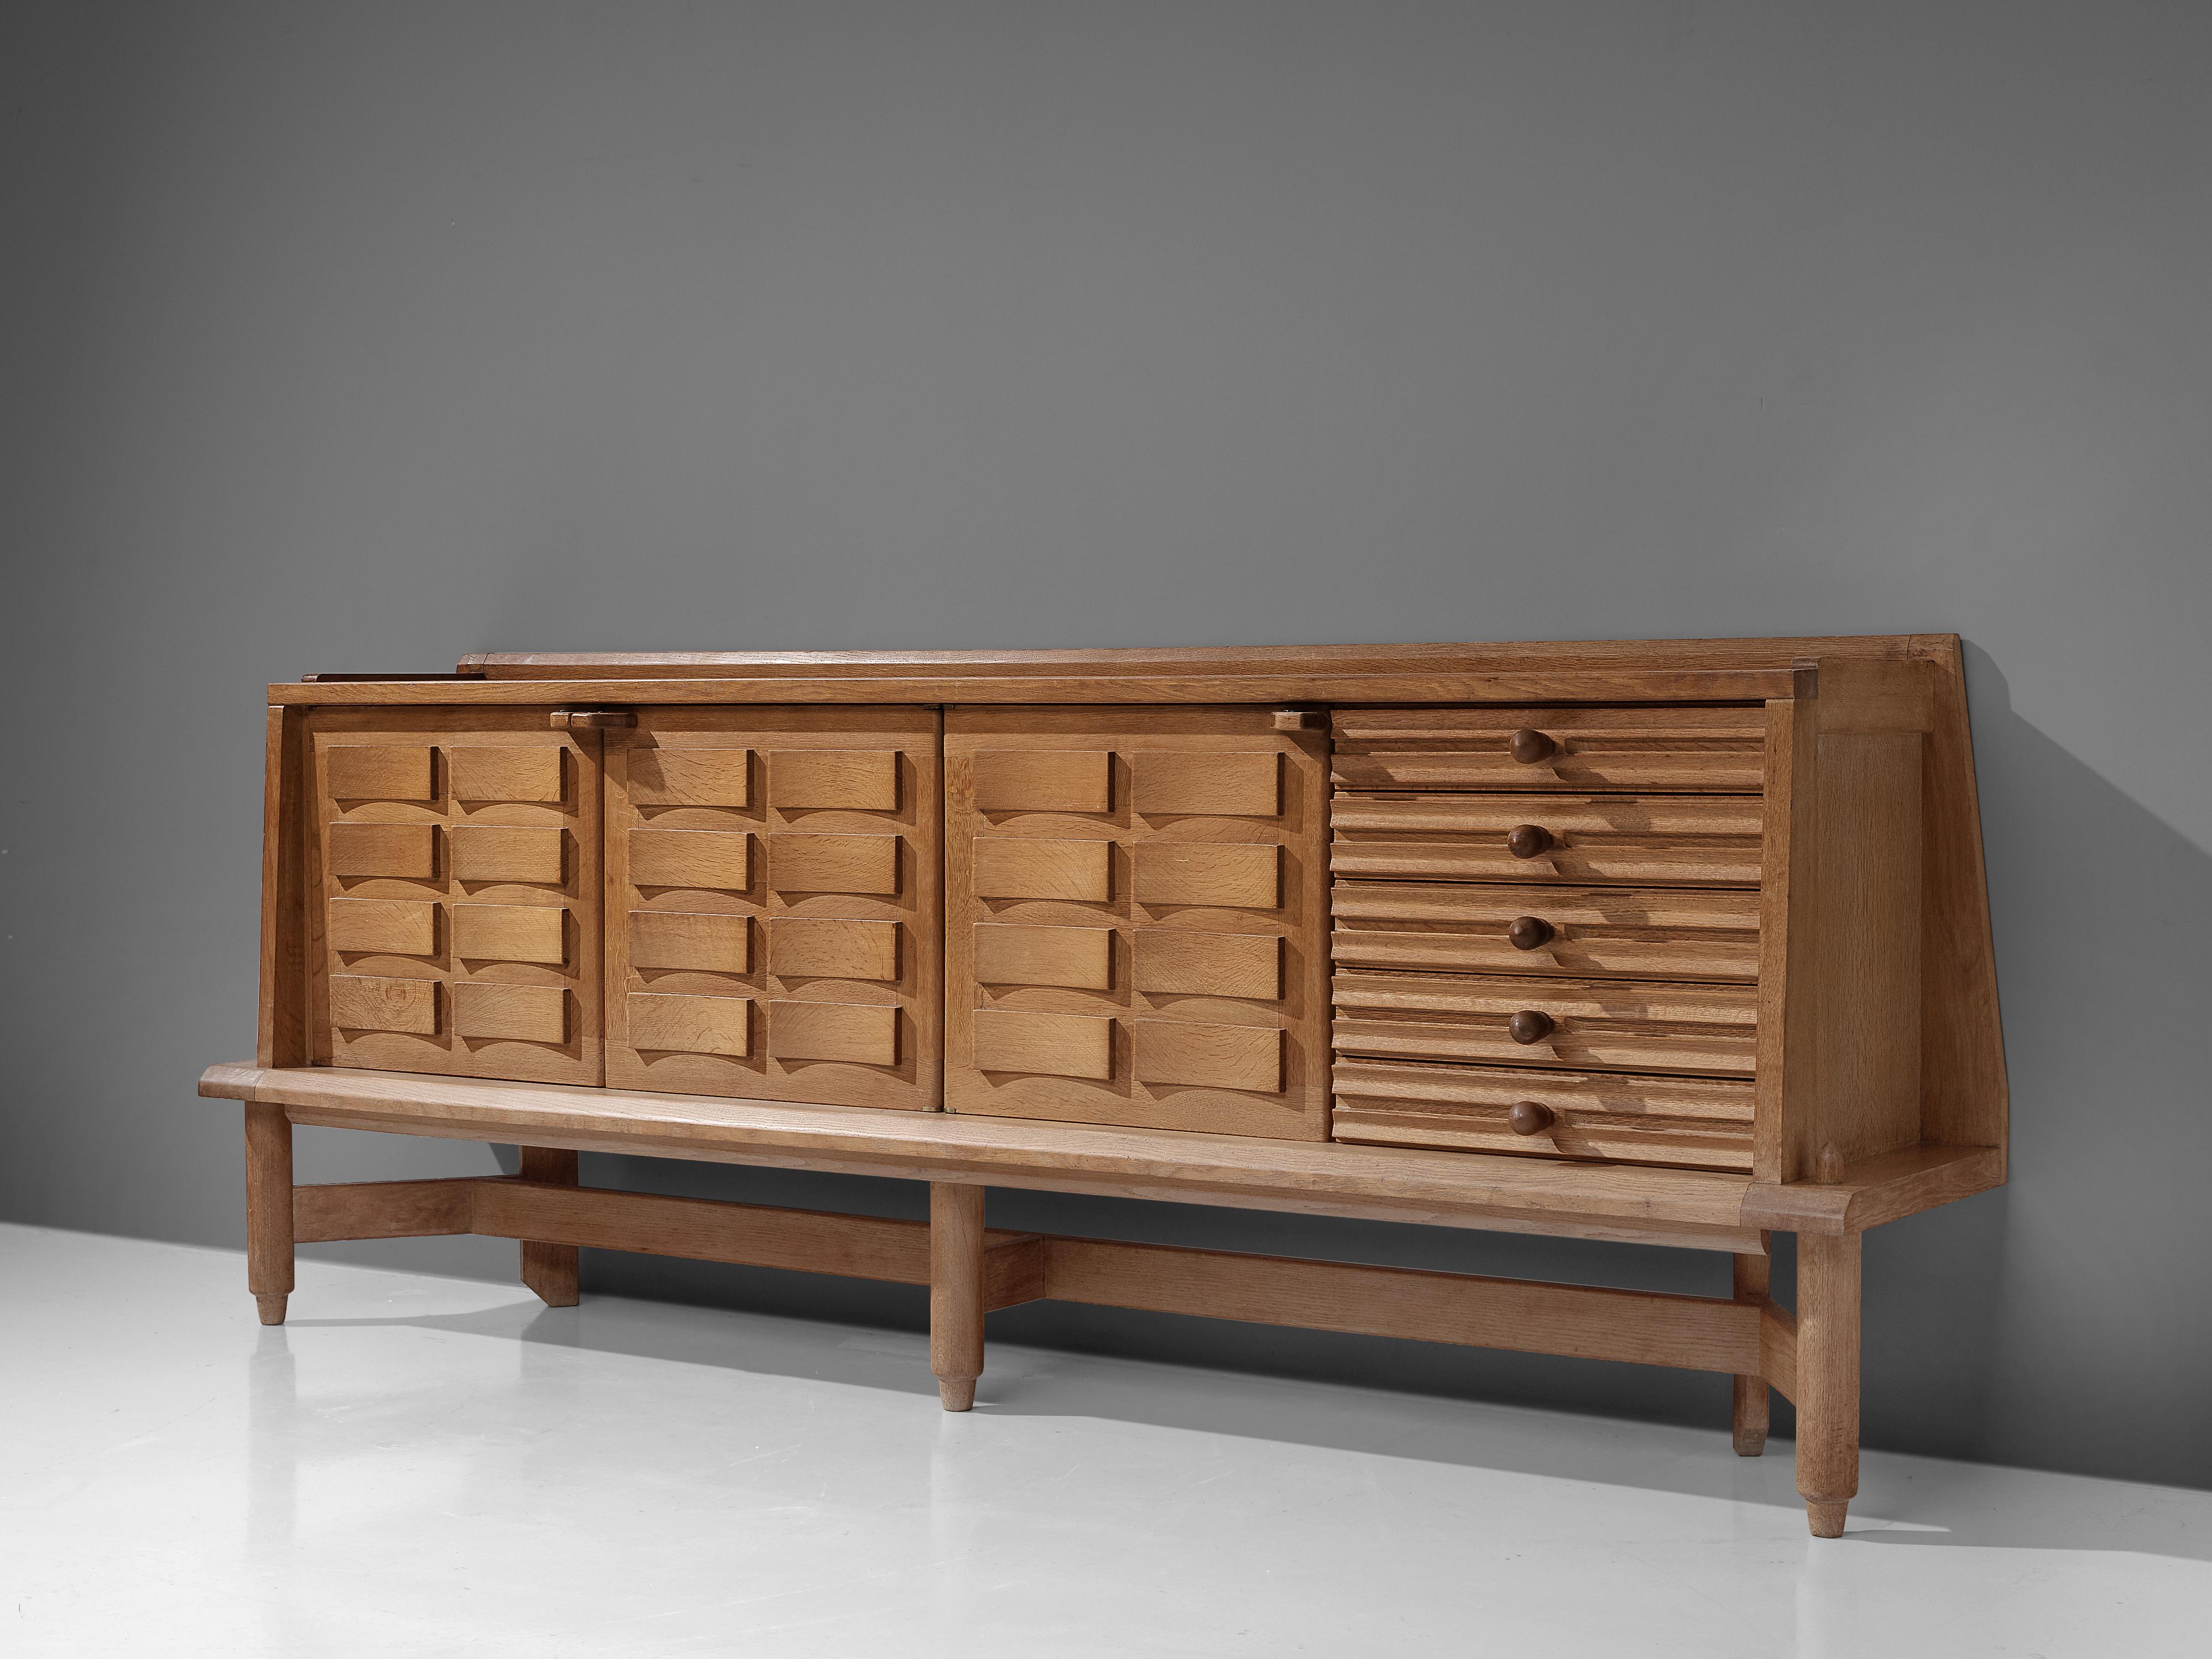 Guillerme and Chambron, large sideboard, oak, ceramic, France, 1960s.

This large sideboard is designed by Guillerme and Chambron and features a geometric structure on the three doors in the front. Behind these doors you'll find plenty of storage